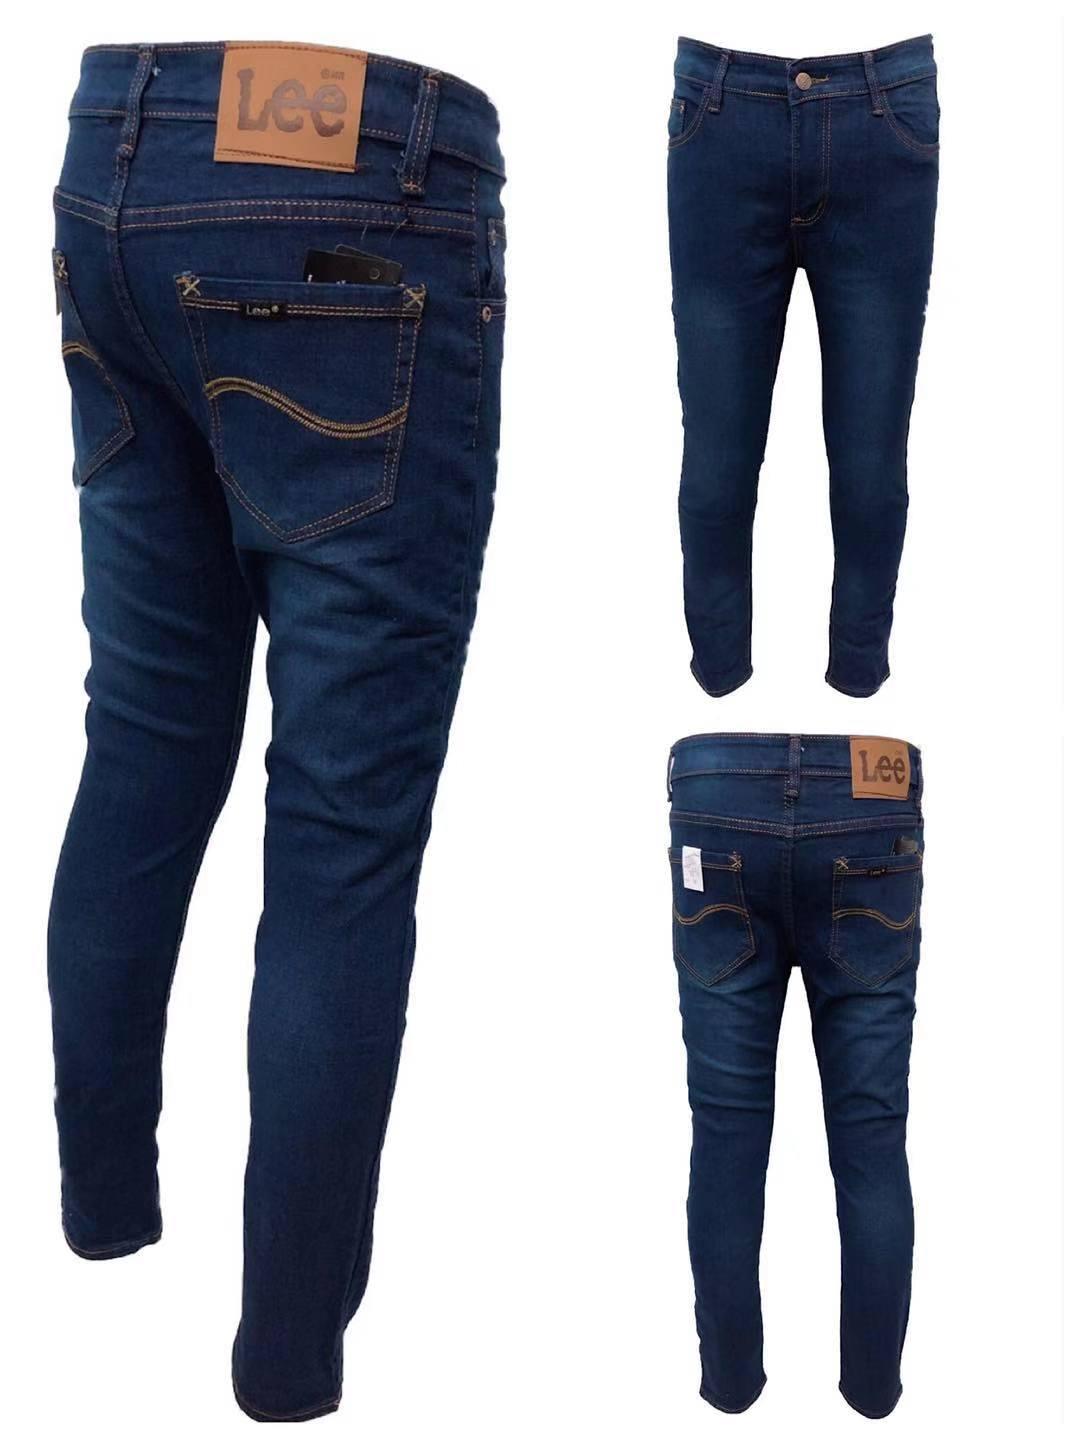 Navy Blue Stretch Skinny Jeans for Men by Brand